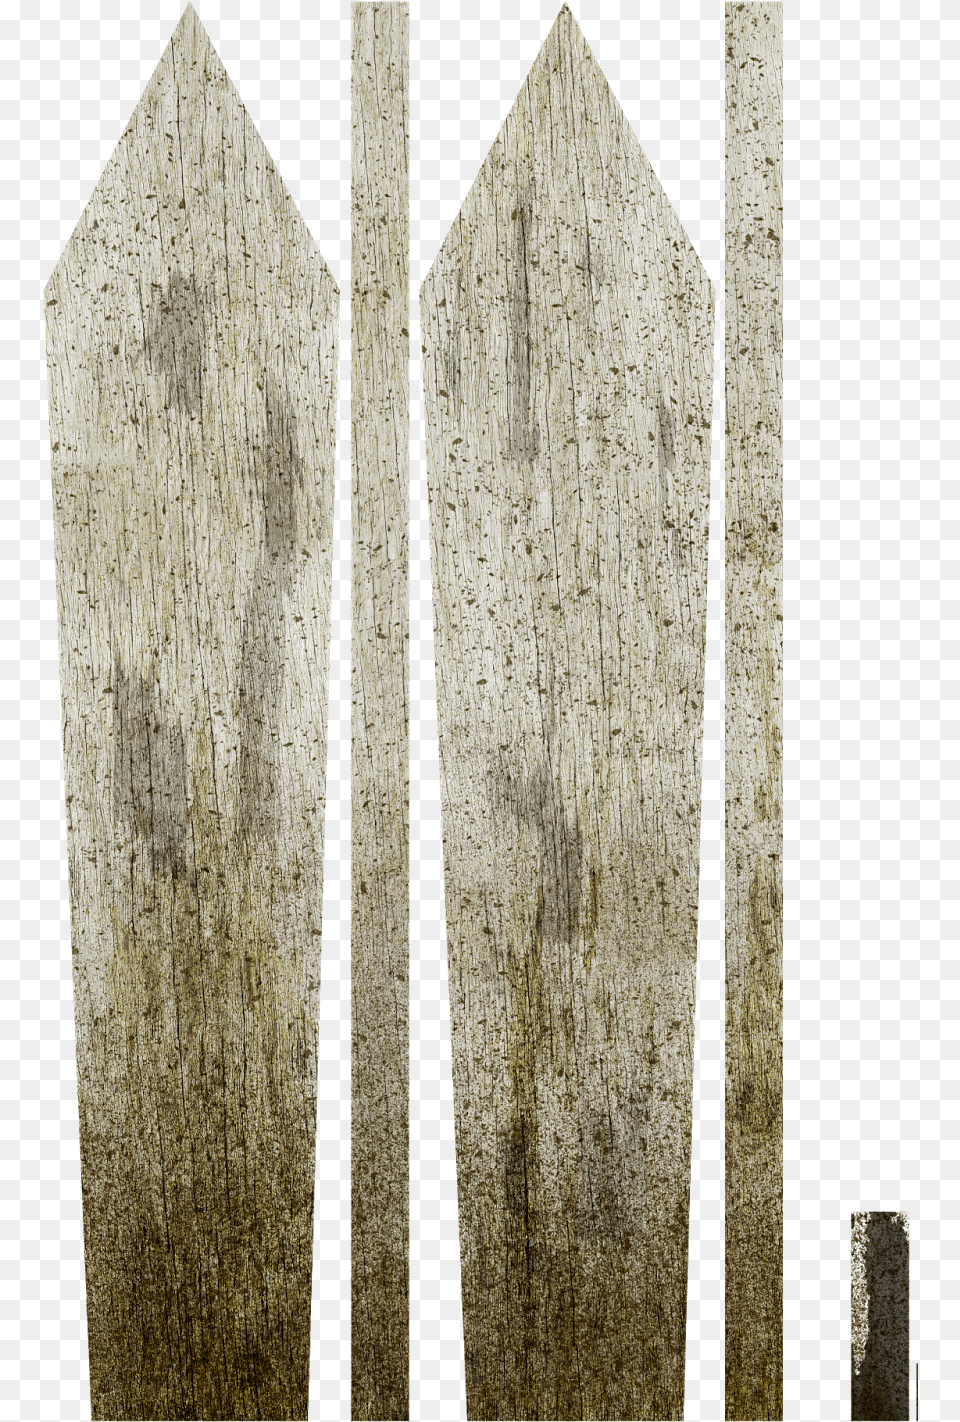 These Are Some Variations Of The Picket Texture To Picket Fence, Wood Png